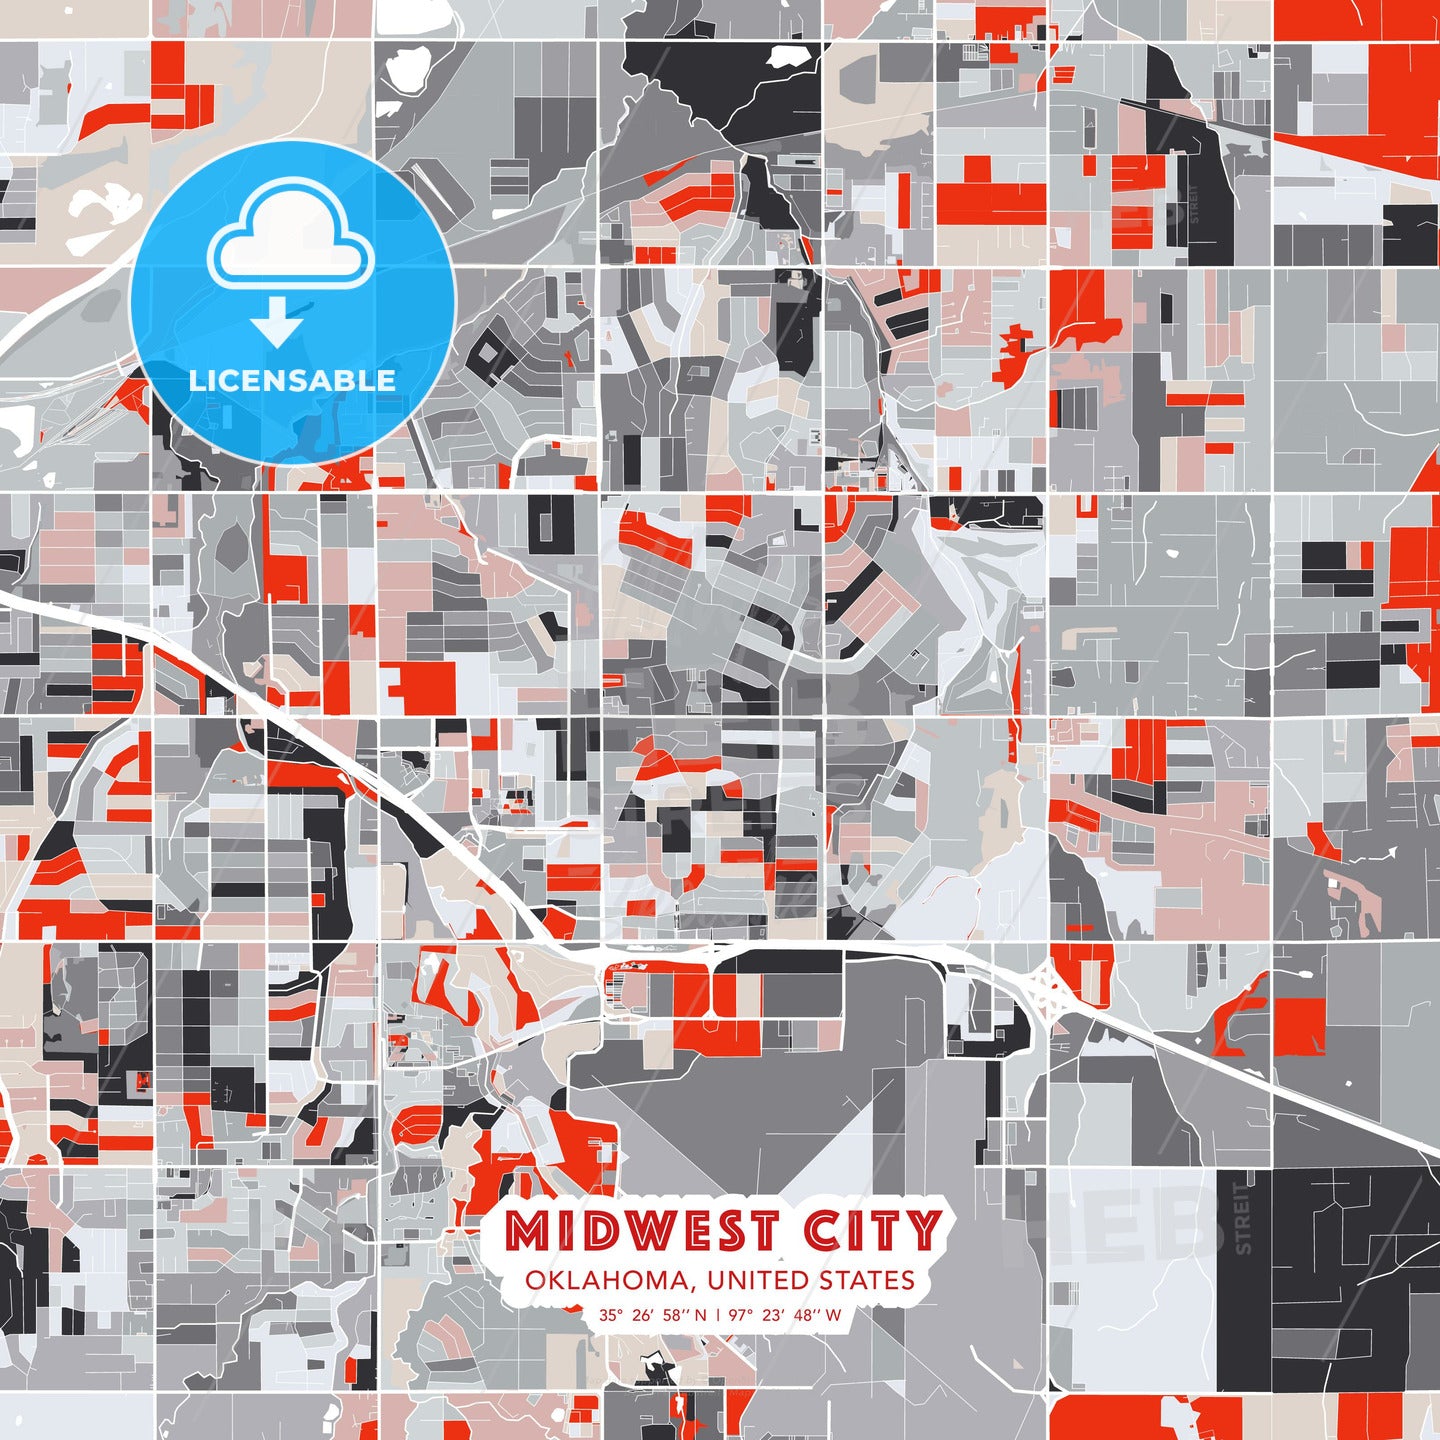 Midwest City, Oklahoma, United States, modern map - HEBSTREITS Sketches